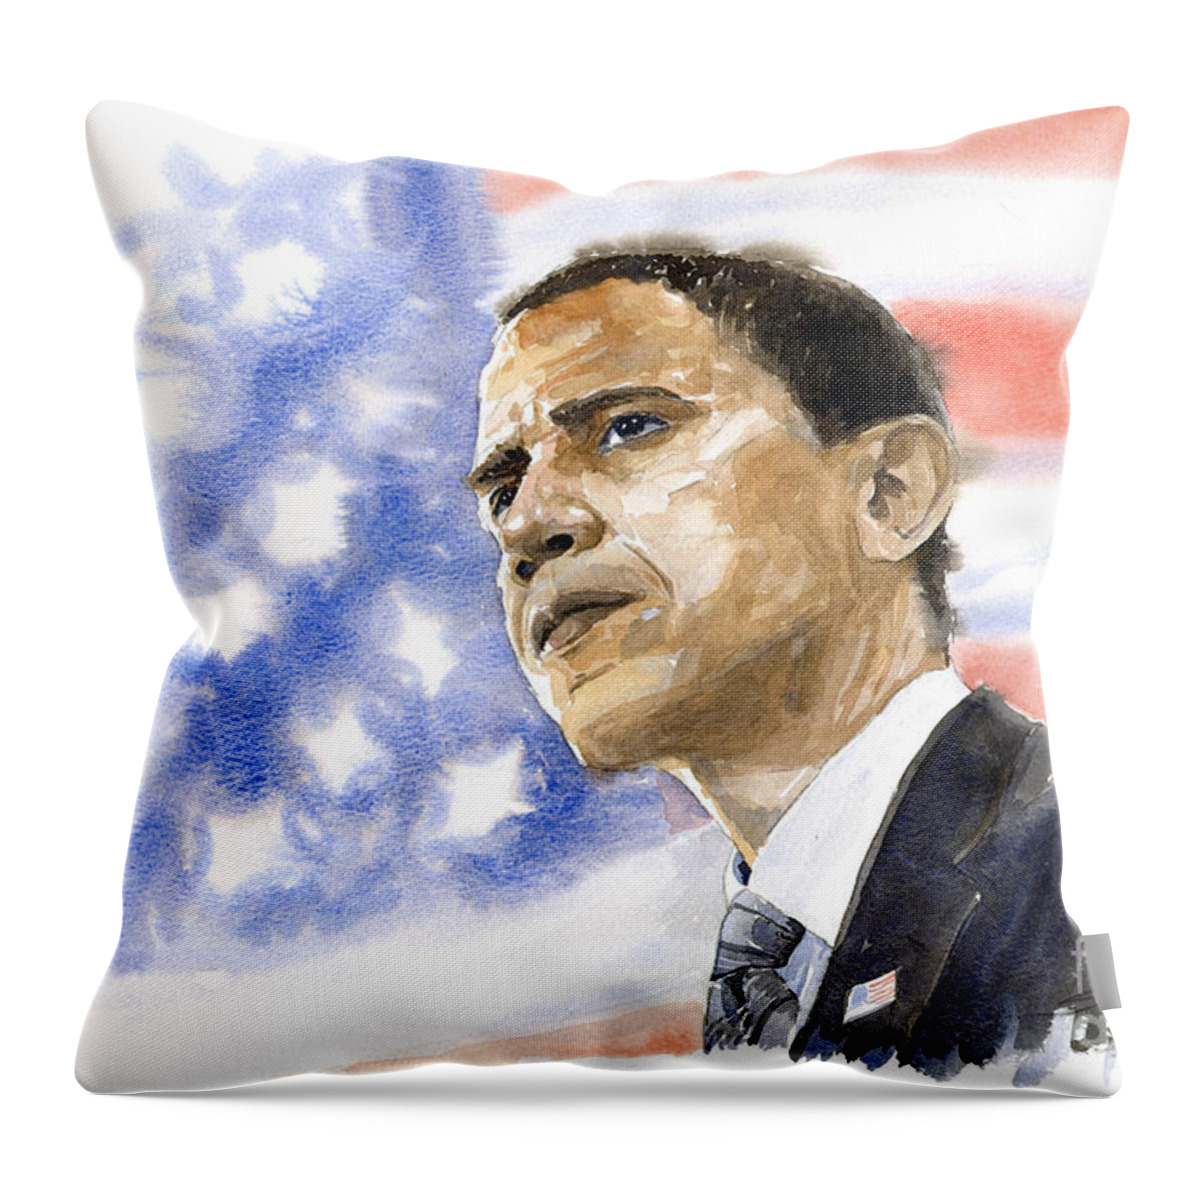 Watercolour Throw Pillow featuring the painting Barack Obama 03 by Yuriy Shevchuk